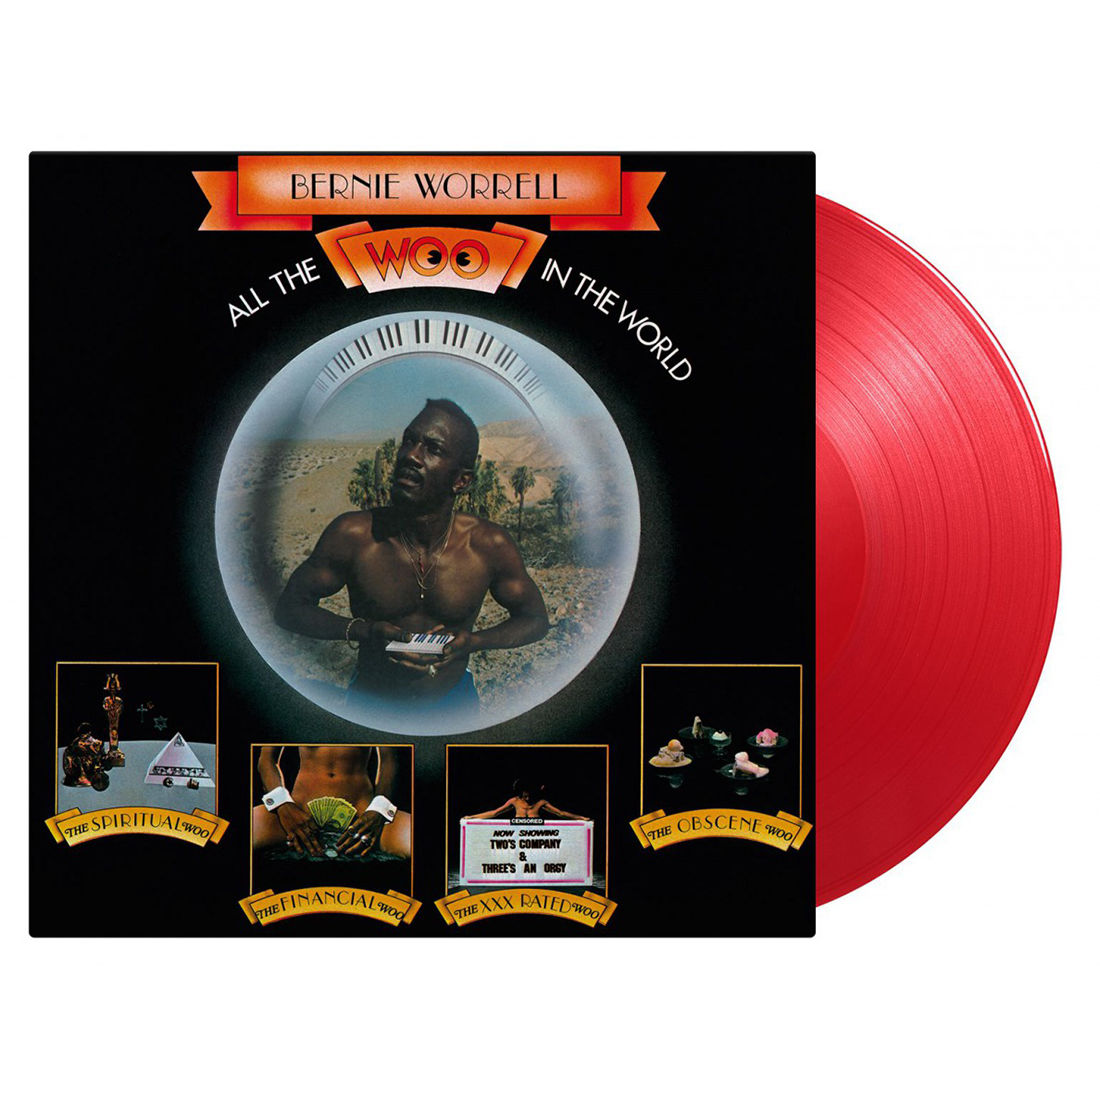 All The Woo In The World: Limited Translucent Red Vinyl LP